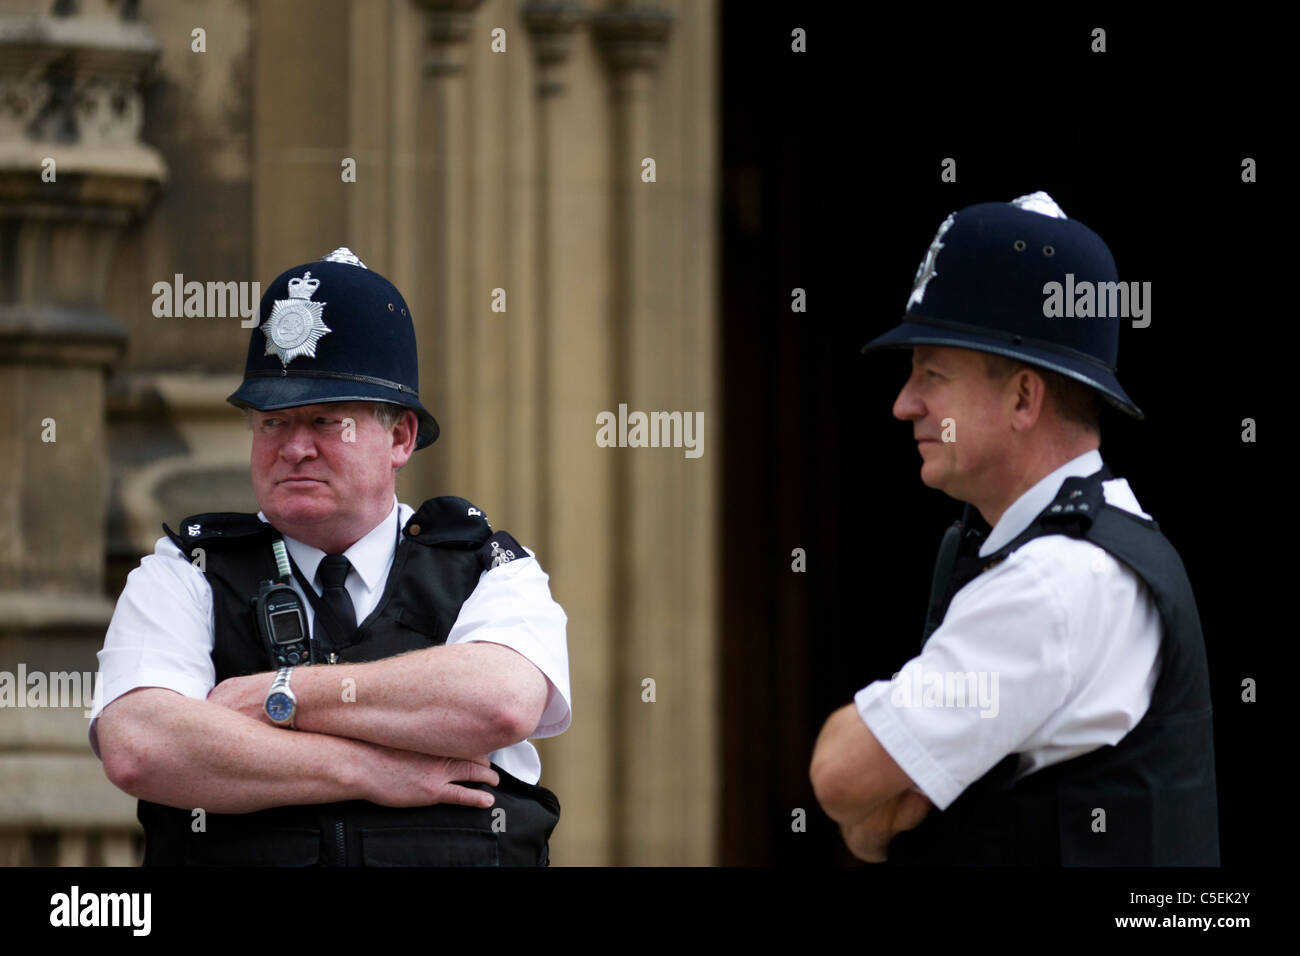 Two Metropolitan police officers talk on duty while guarding Britain's parliament in Westminster, London. Stock Photo